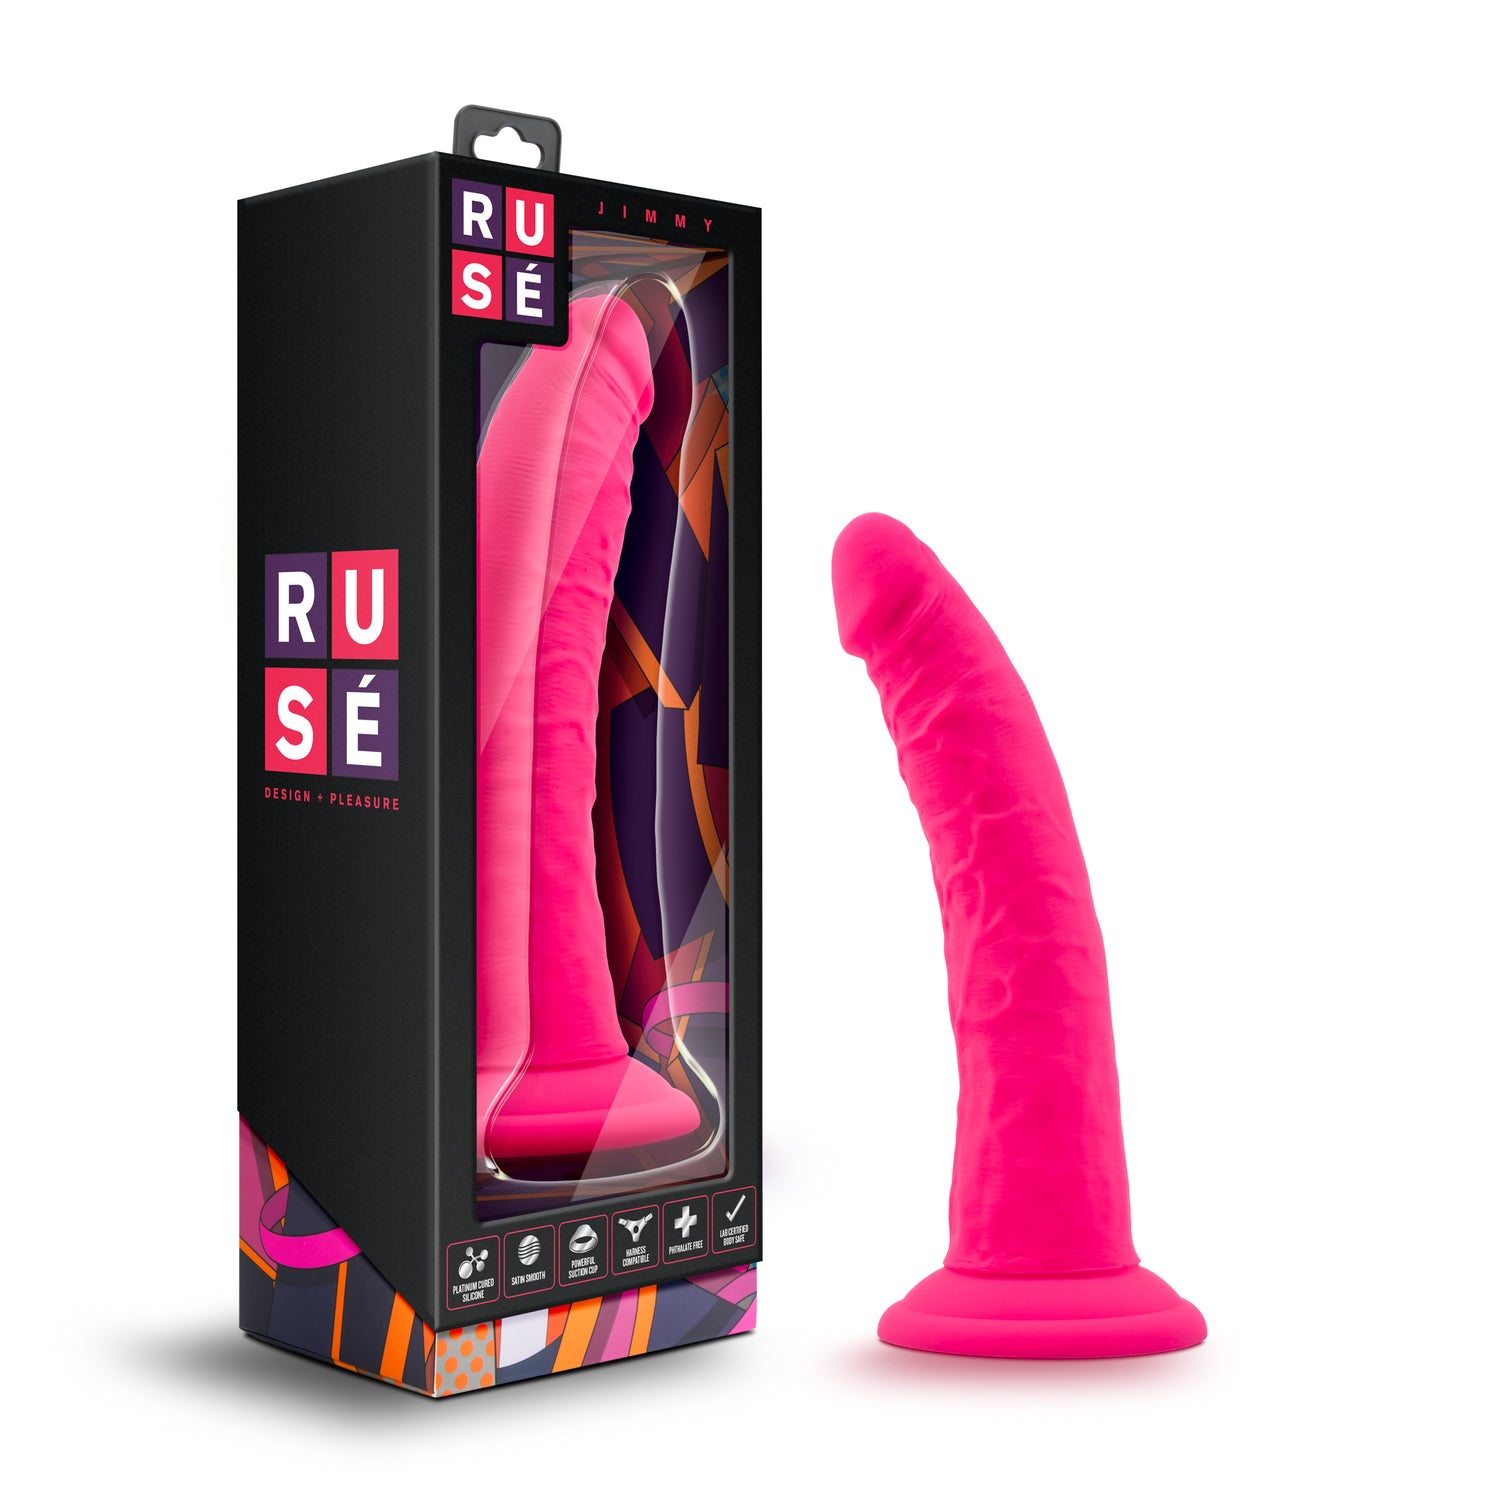 Ruse Jimmy Hot Pink - Just for you desires